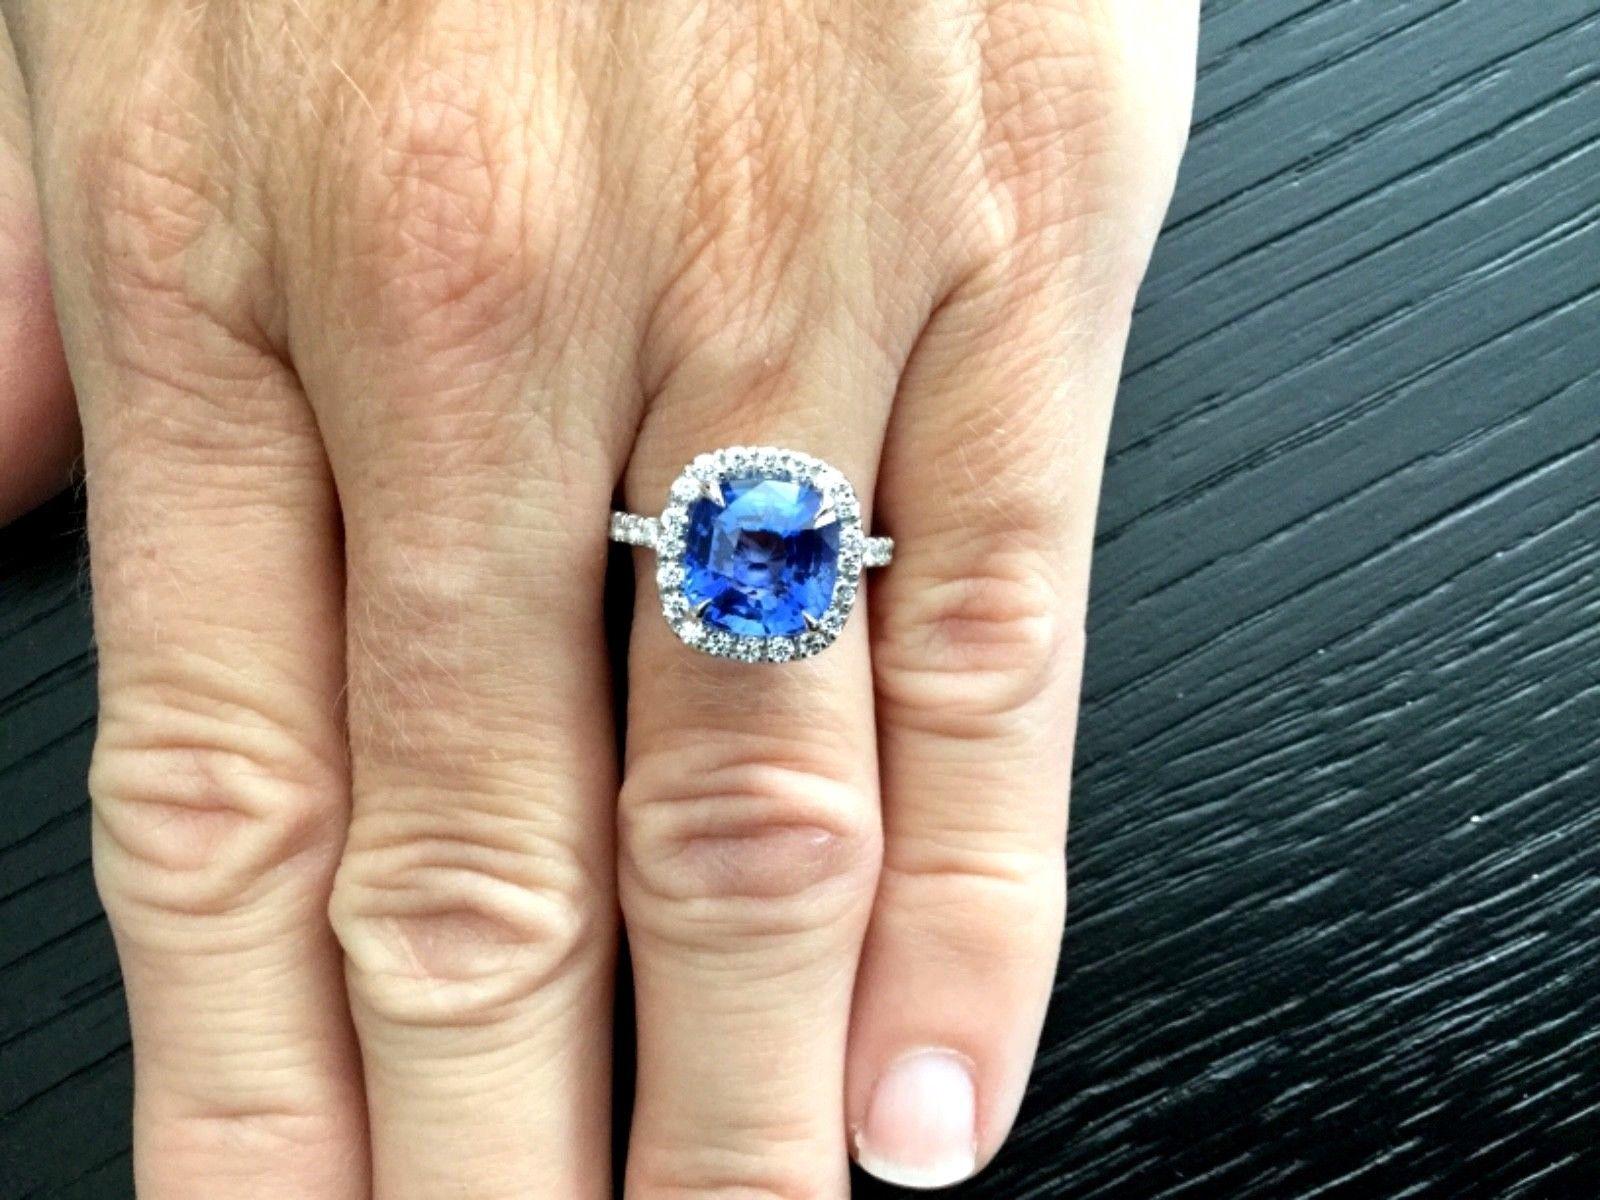 MAJOR PRICE REDUCTION!  MAKING ROOM FOR NEW INVENTORY!

For your consideration is a 5.21 carat Cushion cut, UNHEATED natural, transparent, blue Sri Lankan sapphire set in a brand new 14k white gold setting with approximately .59 carats of natural G